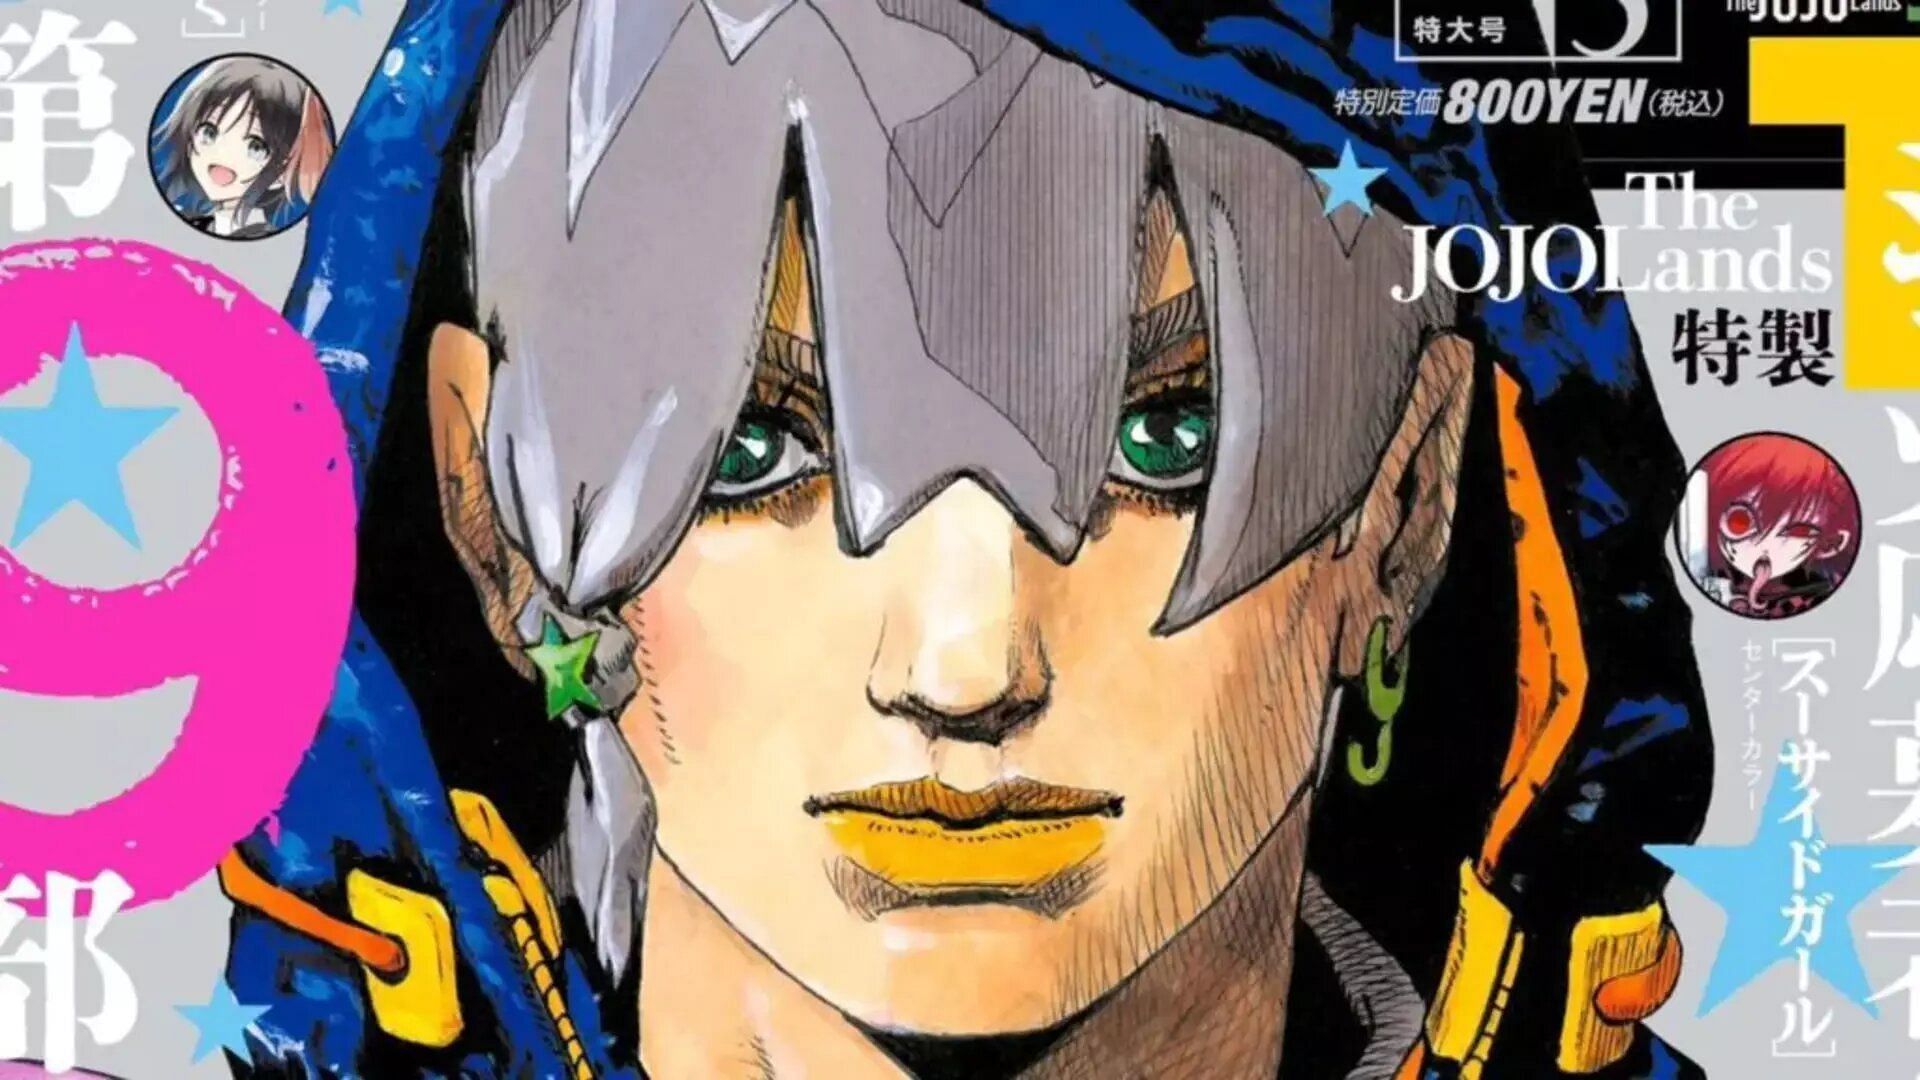 When was a time where something was not a Jojo reference? - Forums 